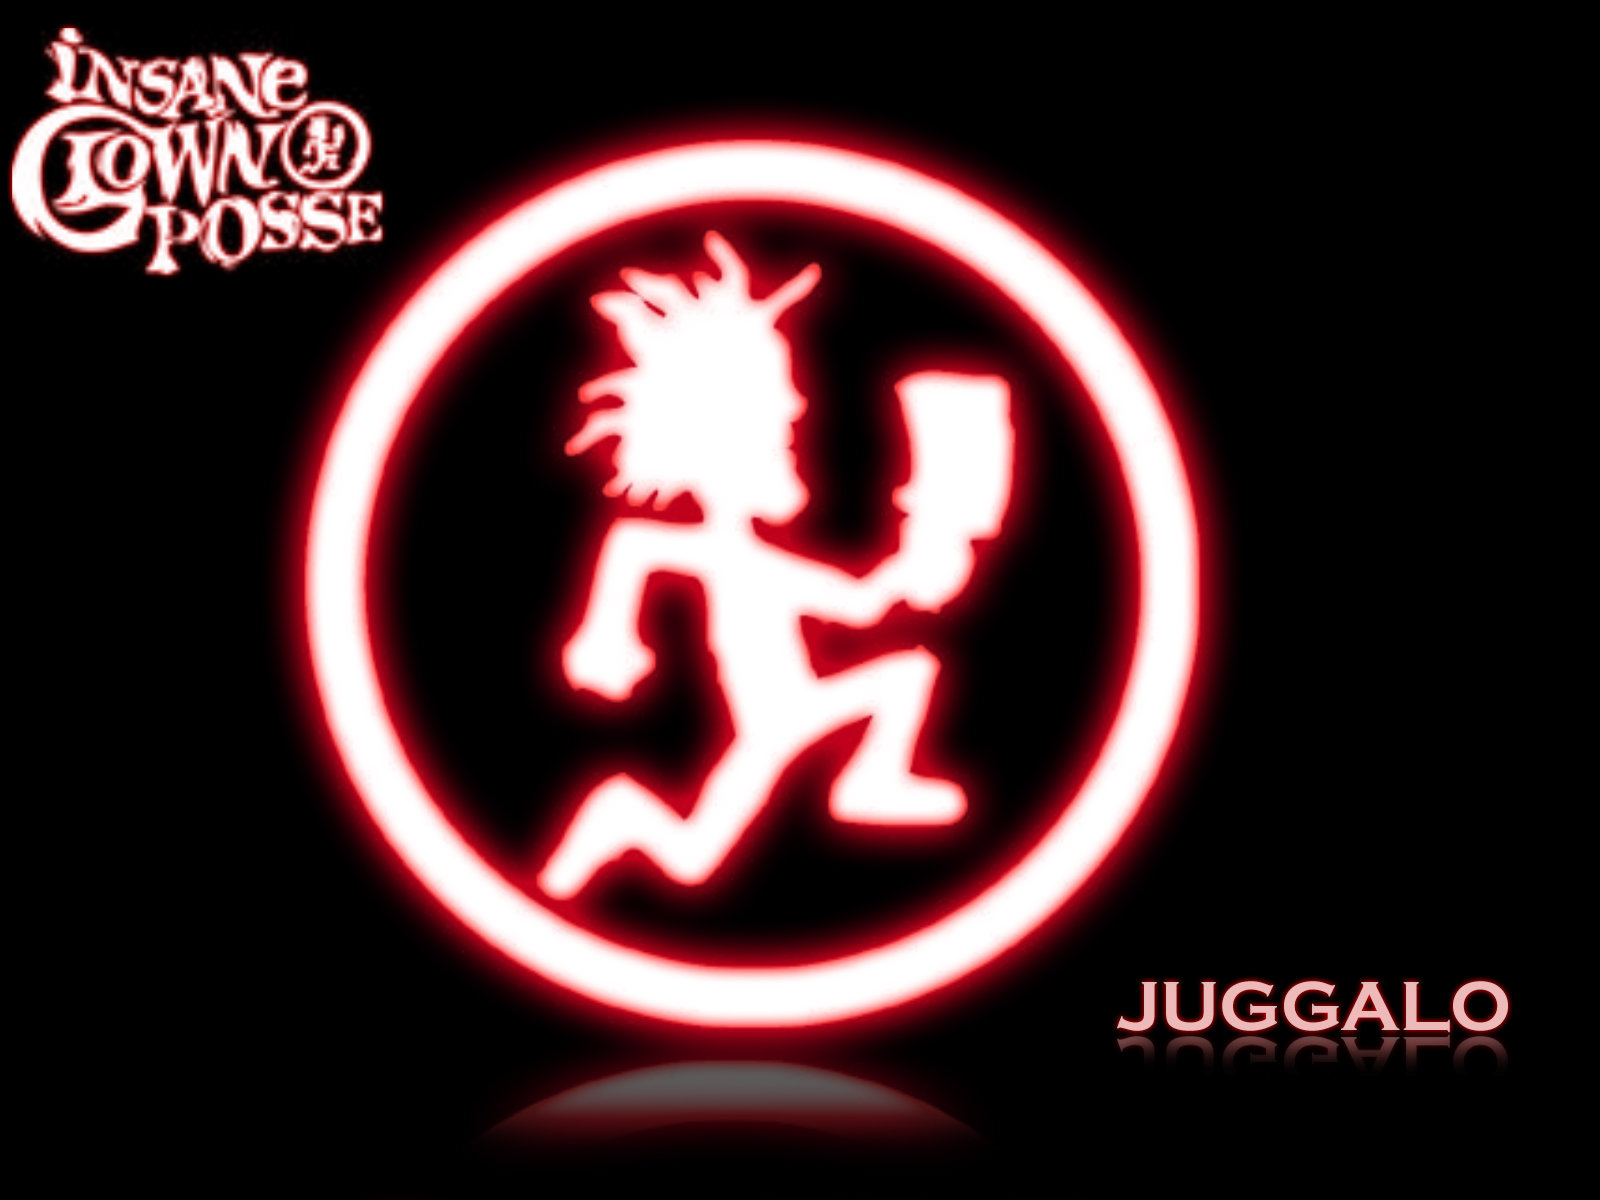 An Icp Wallpaper I Made For A Friends Myspace Let Me Know What You